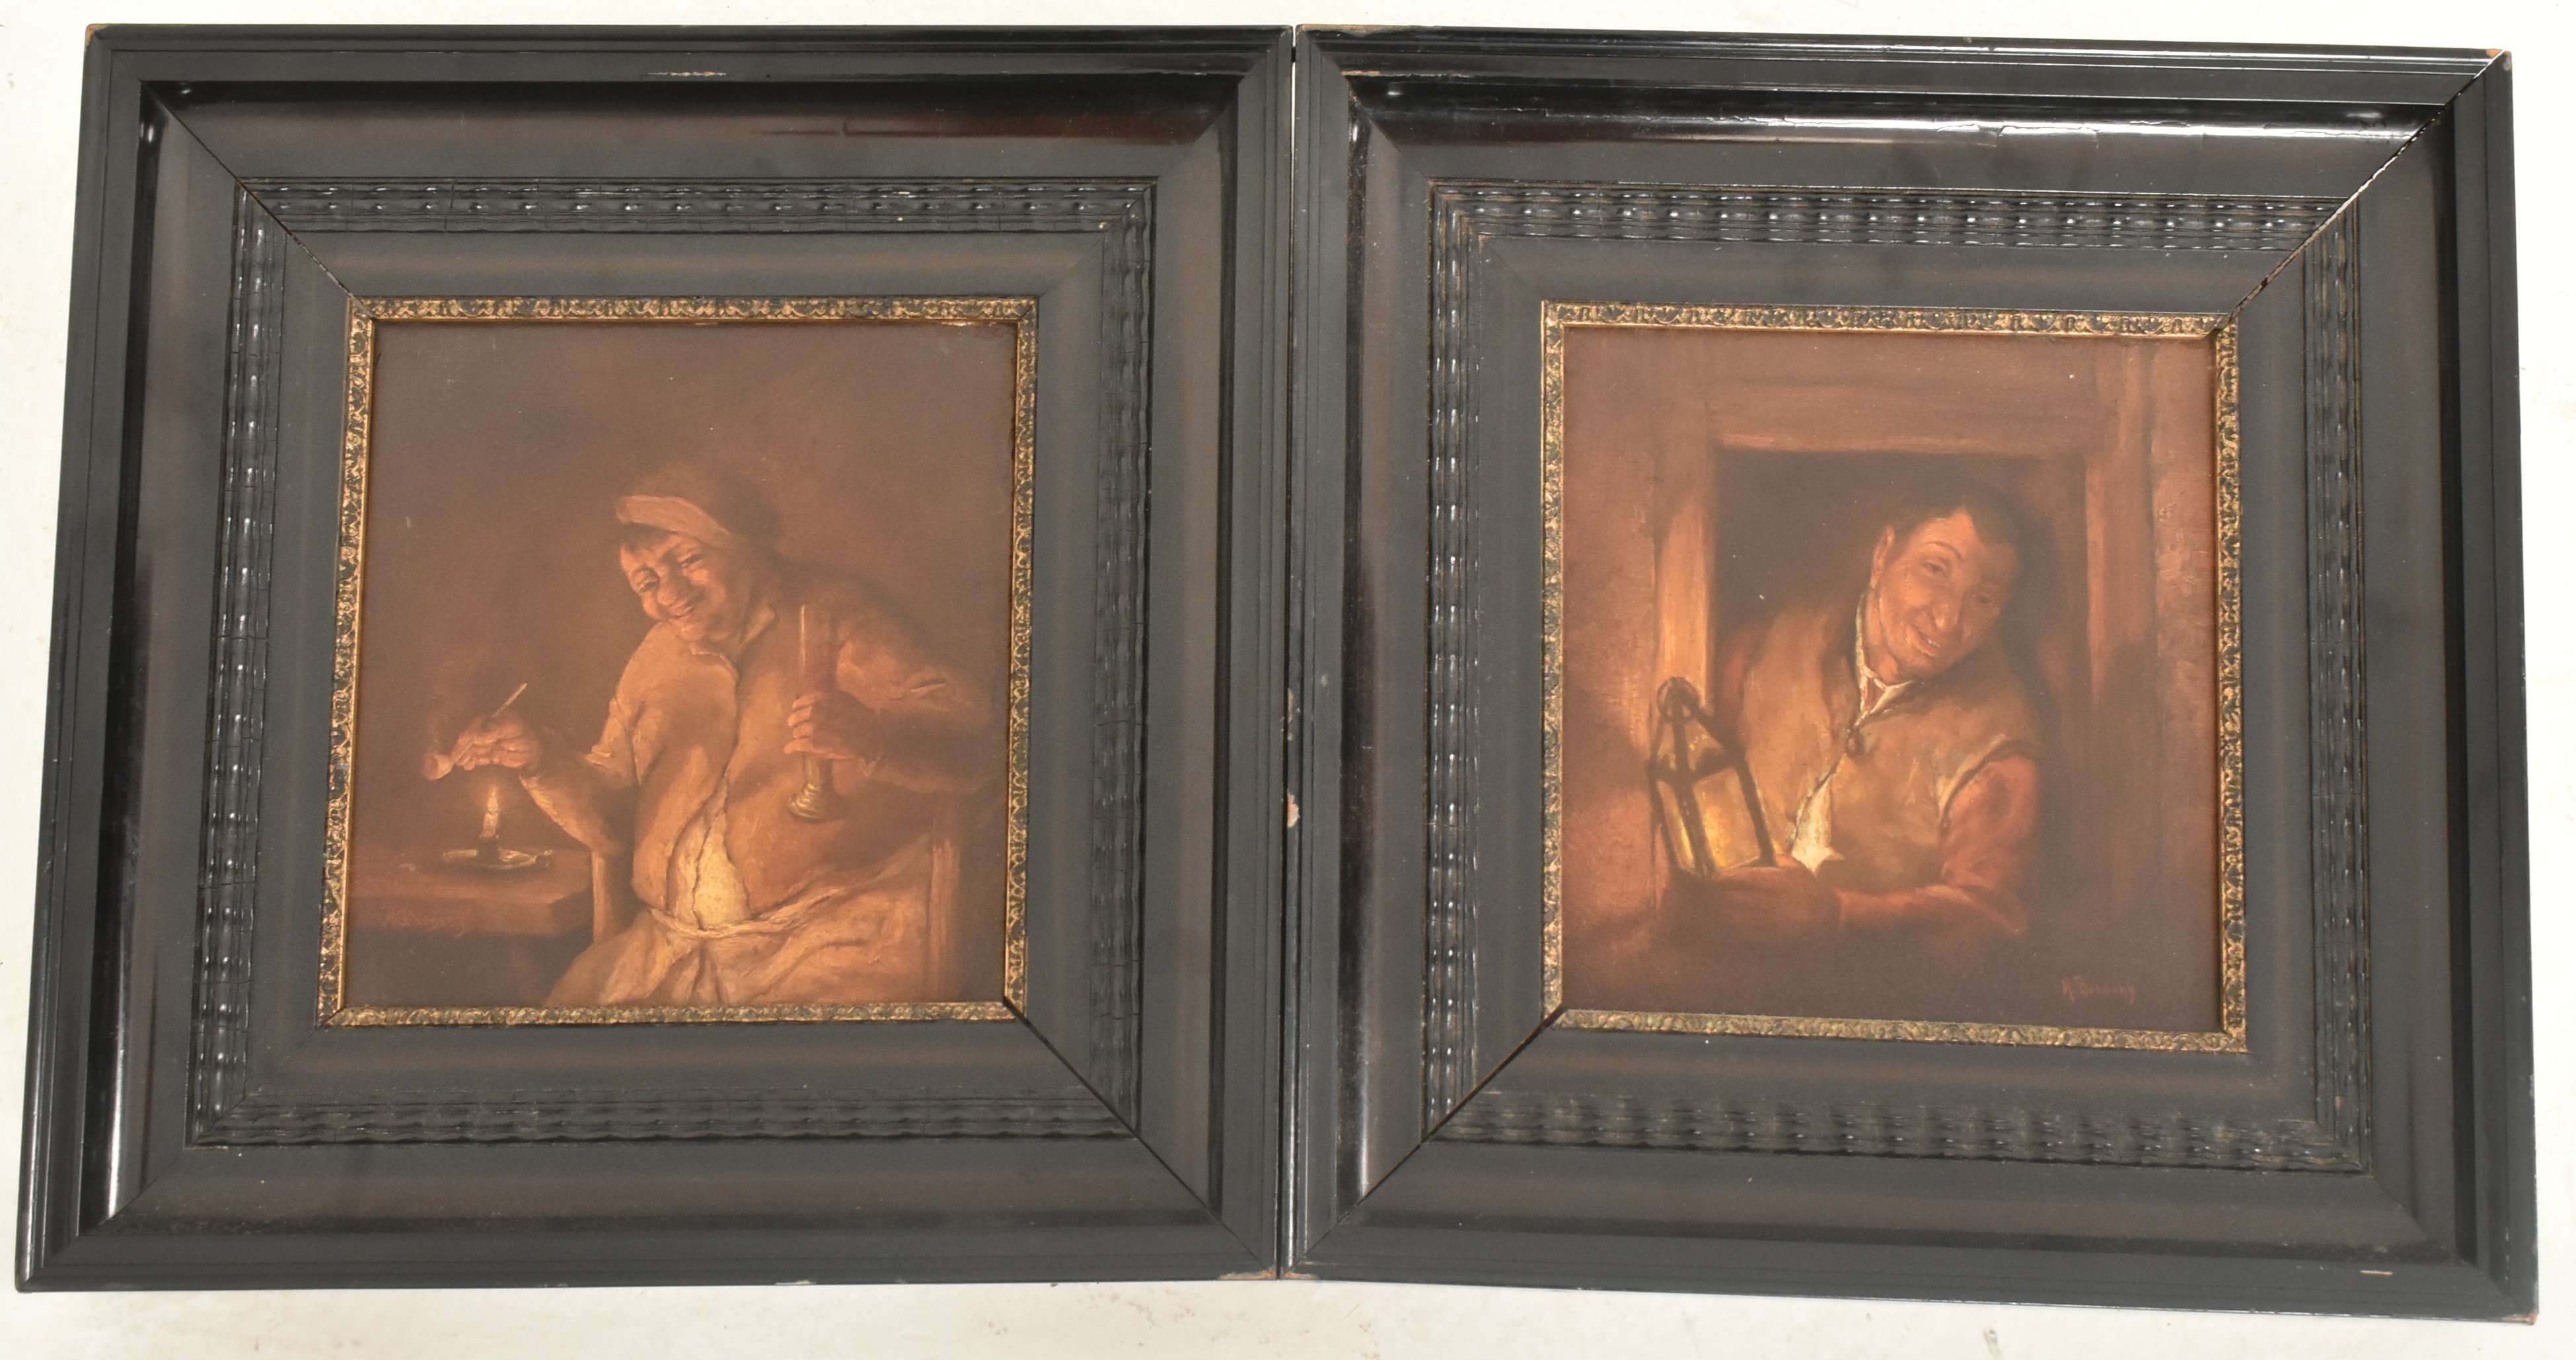 A pair of late 19th century oil on board portrait paintings after the Flemish Dutch Masters. The lot comprising of a portrait painting of man lighting a candle - Dutch School